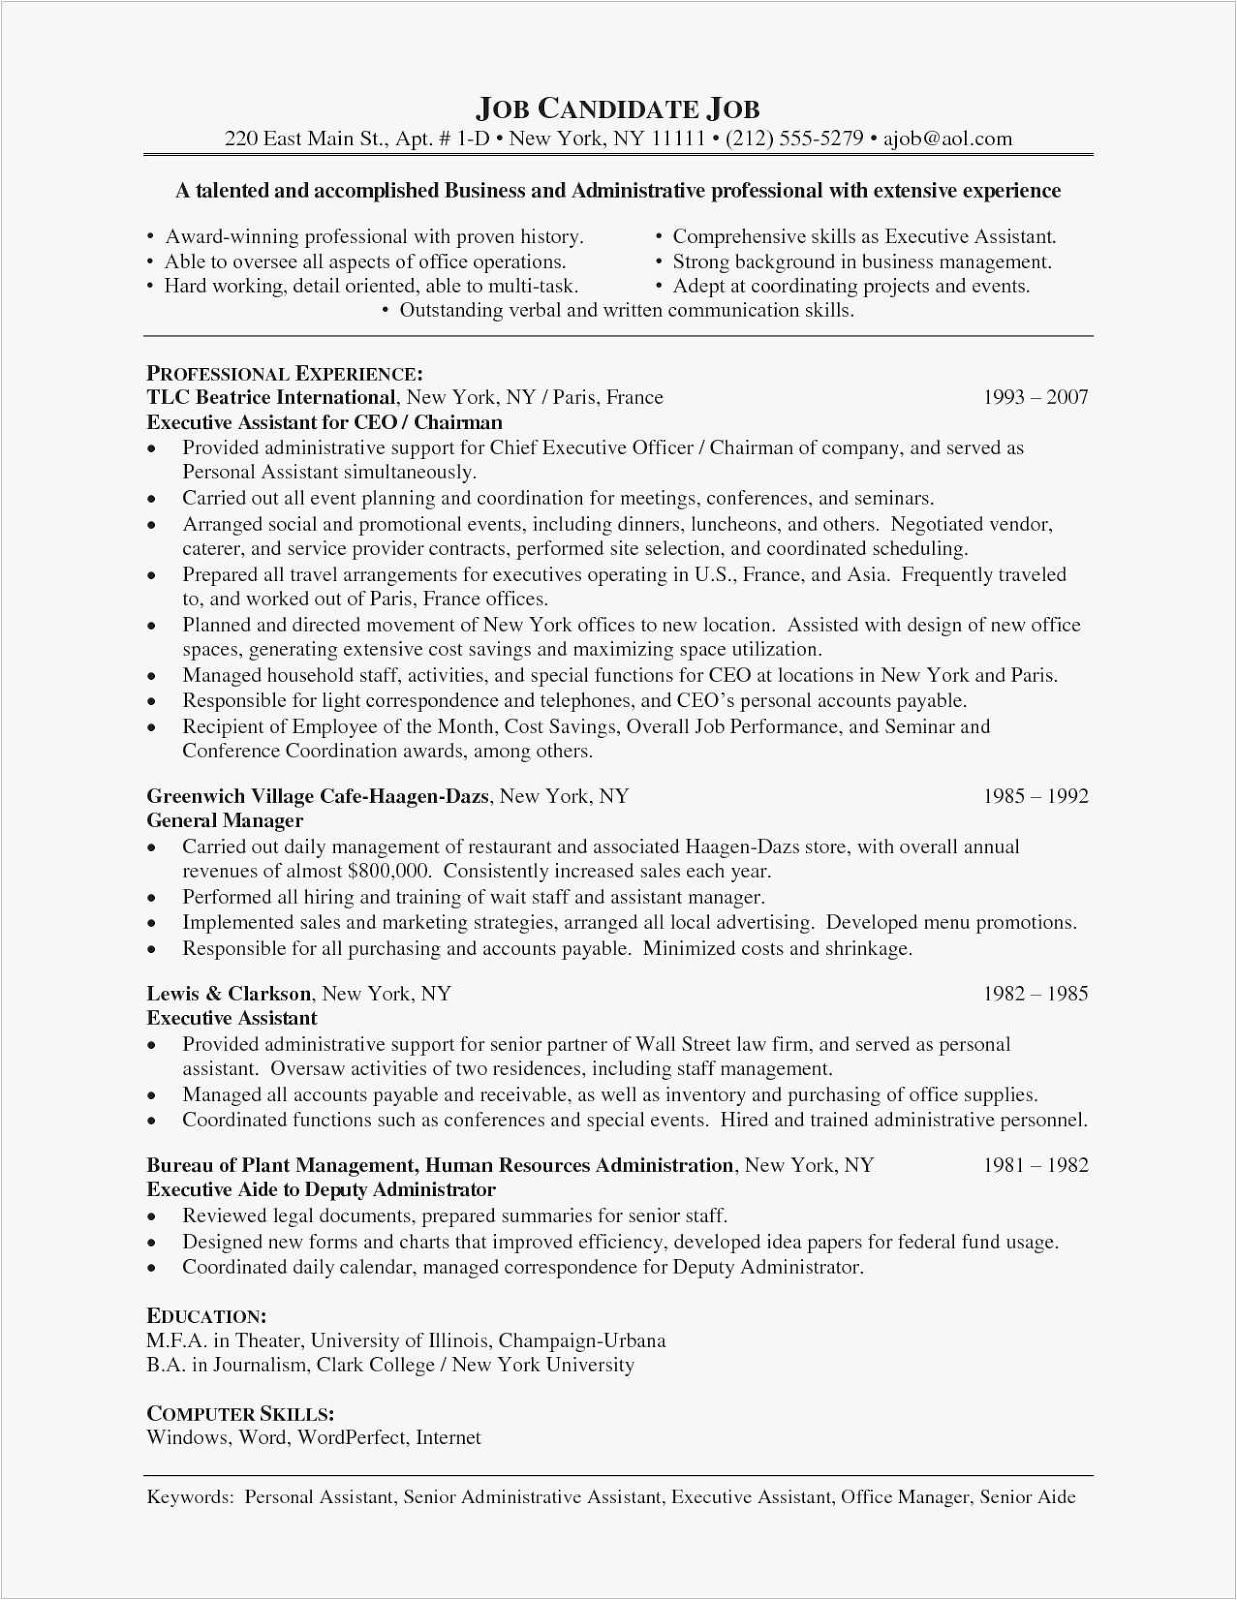 Administrative Assistant Resume Summary Administrative Assistant Resume Summary Examples Resume Objective Examples Executive Resume Template Resume Examples